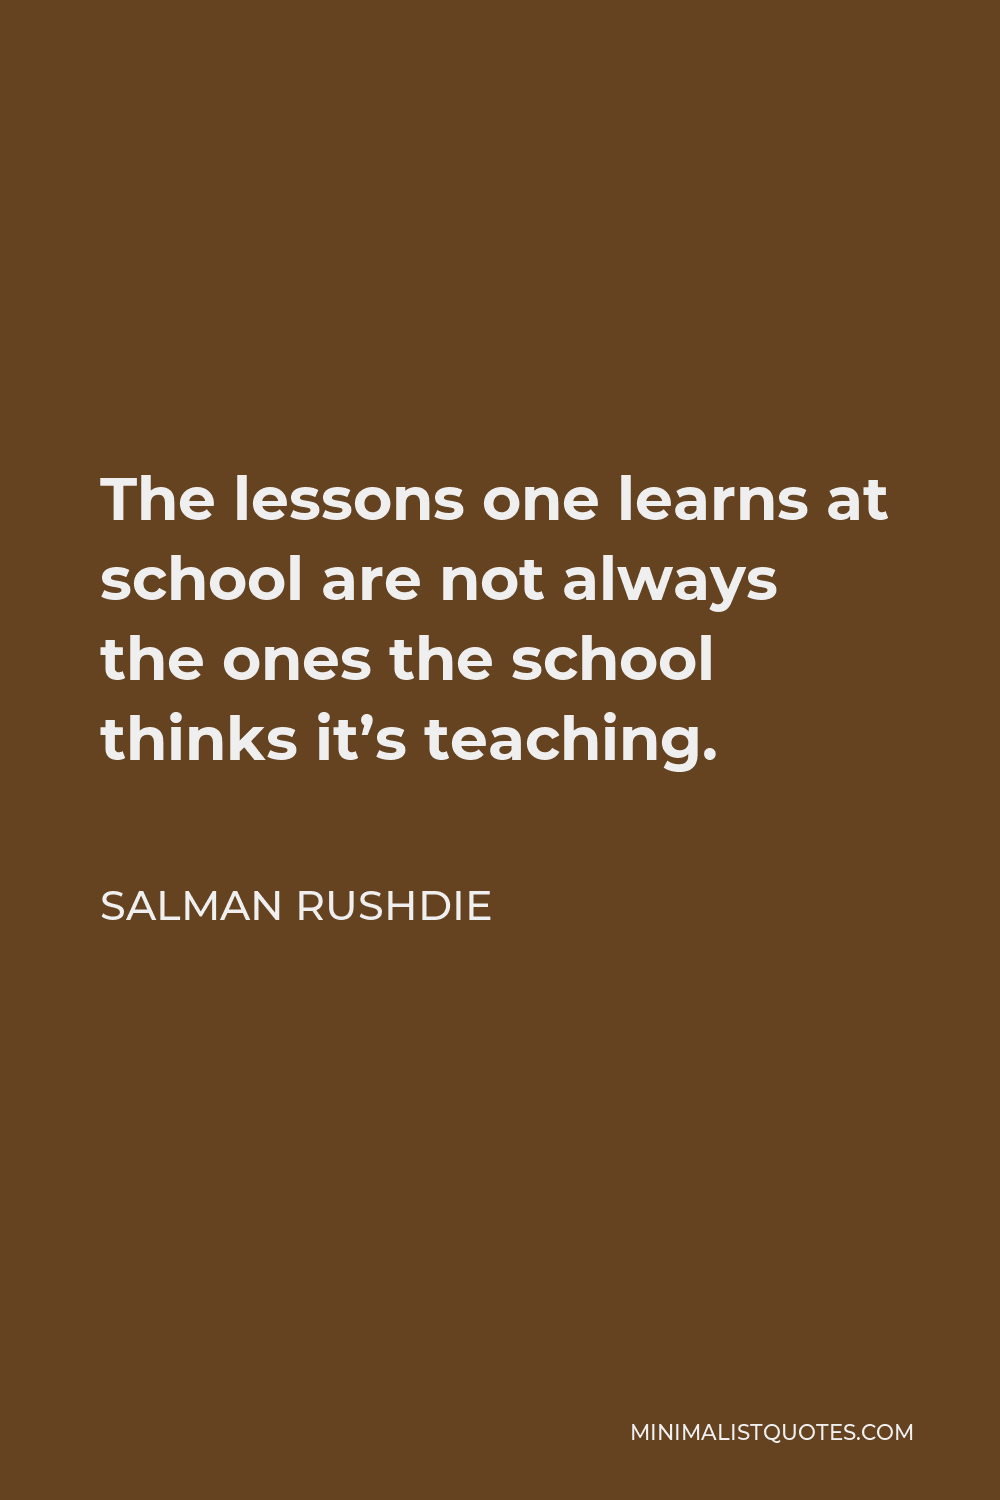 Salman Rushdie Quote - The lessons one learns at school are not always the ones the school thinks it’s teaching.